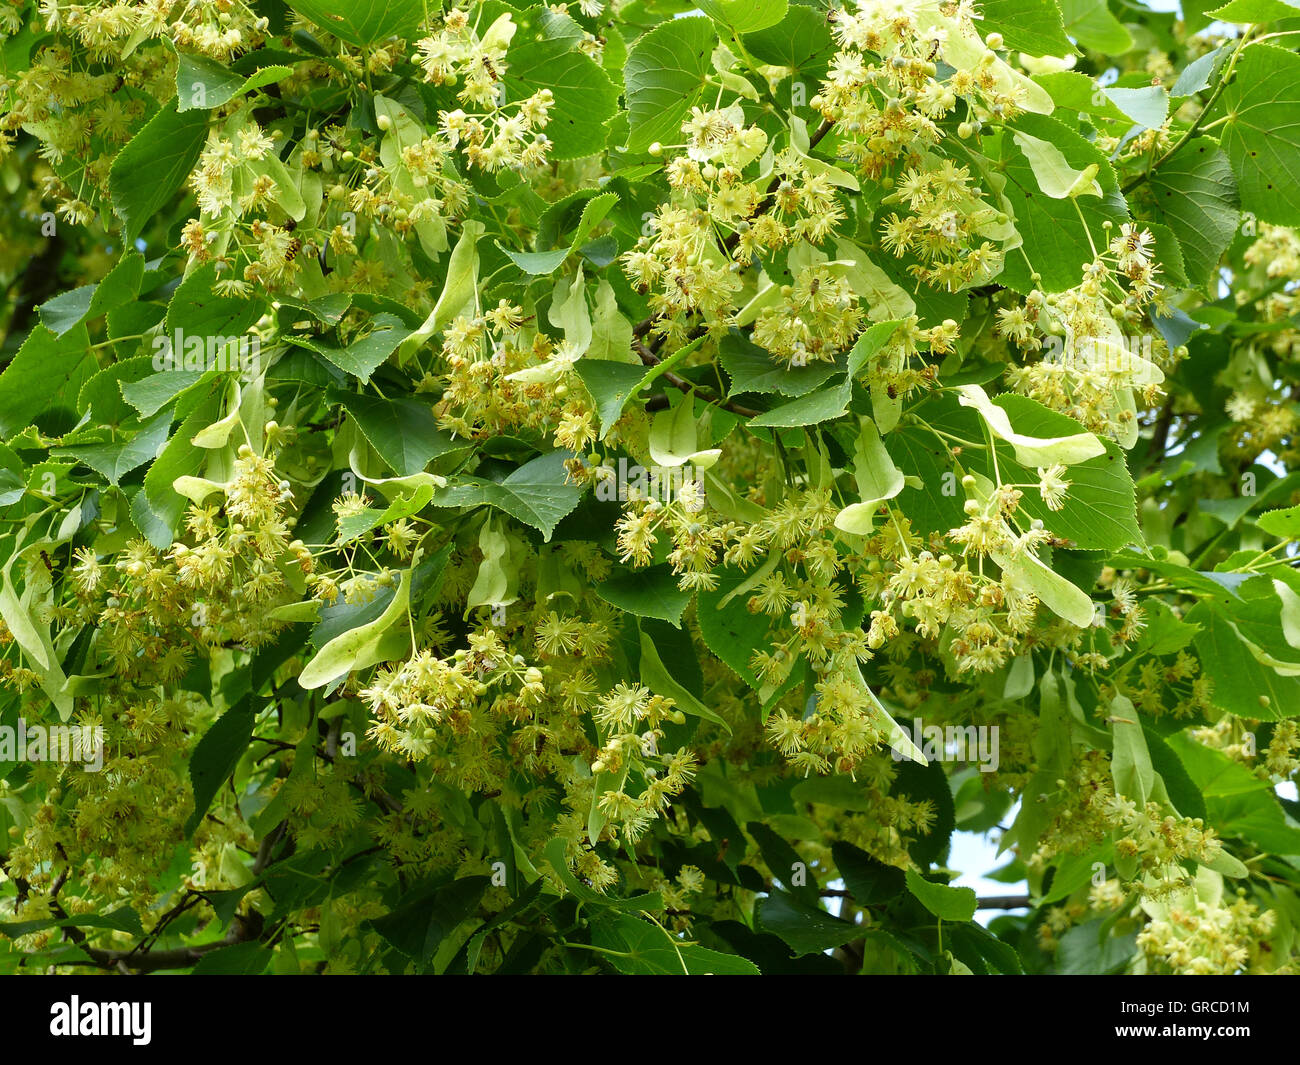 Linden Blossoms, Blossoming Linden Tree Stock Photo - Alamy